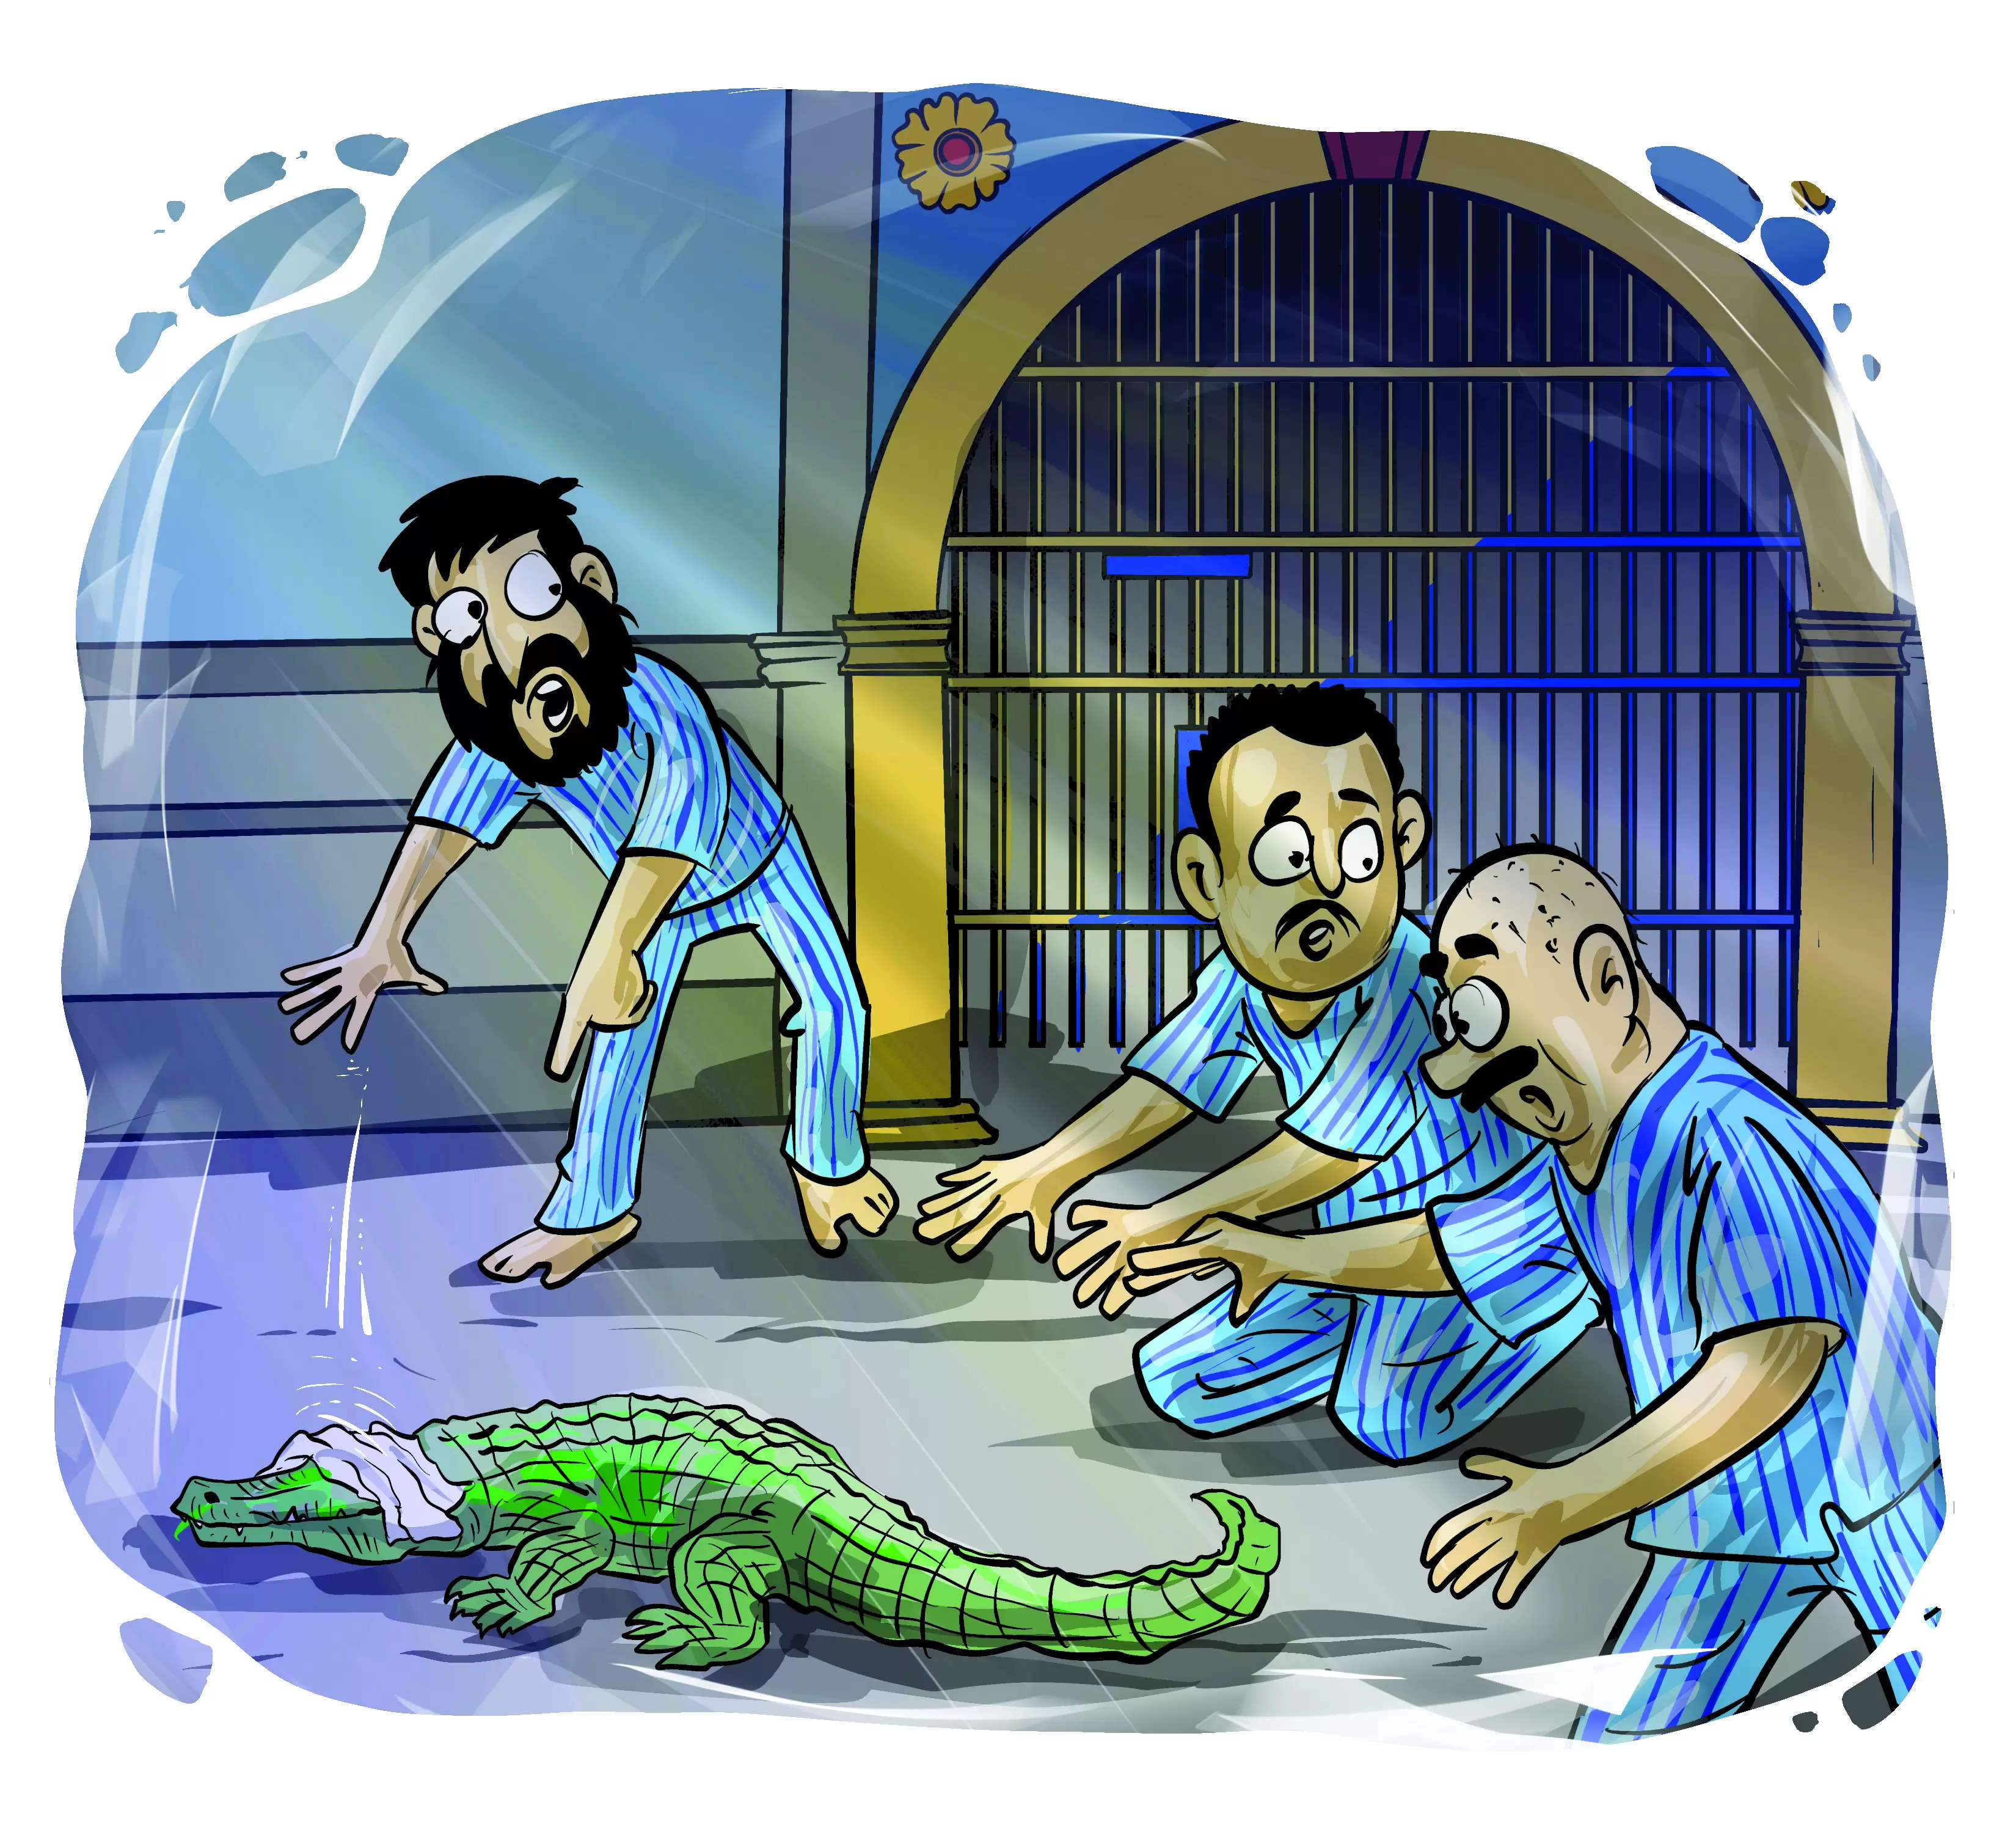 Jailhouse croc: Inmates trap and snap reptile like pros